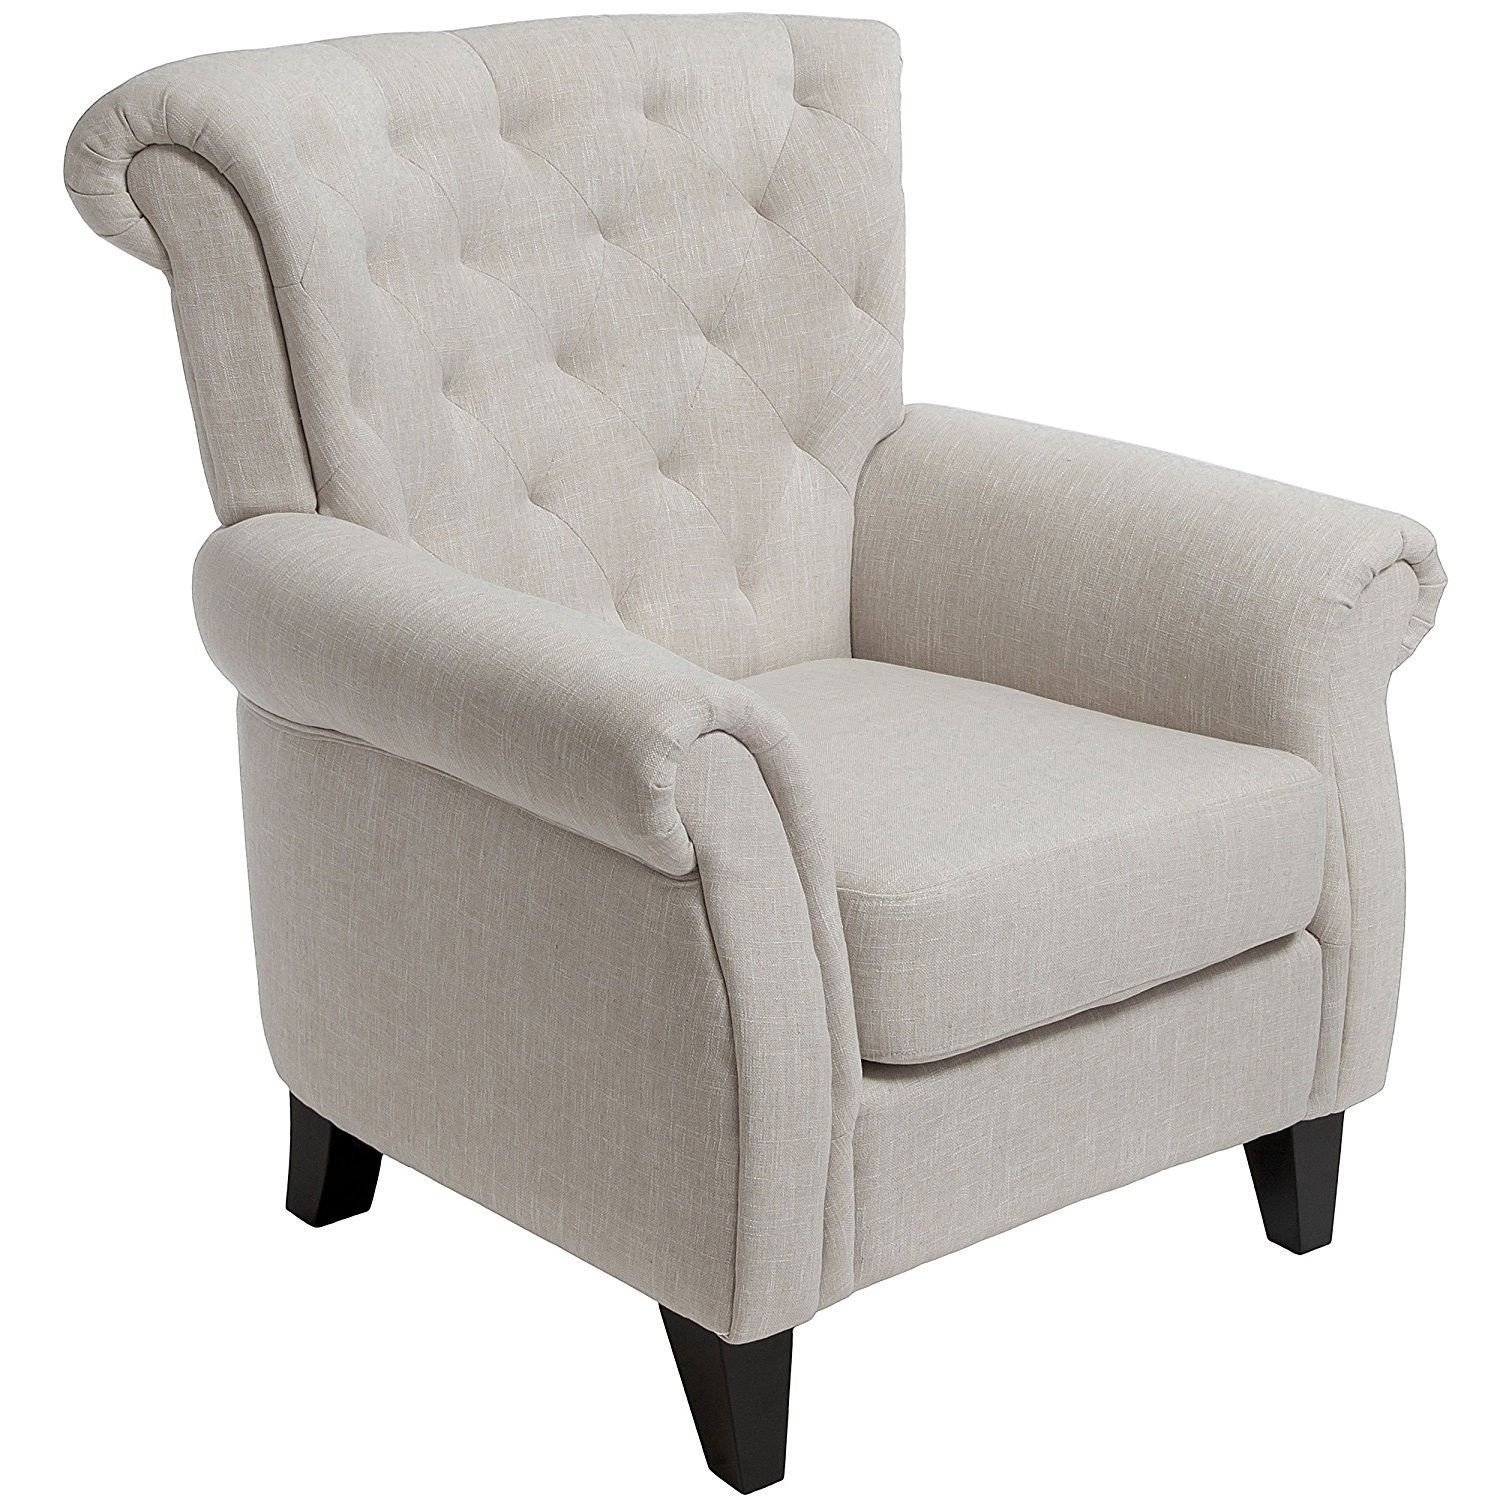 Small Armchair For Bedroom
 Arm Chair Small Bedroom Chairs Ikea Small Accent Chair